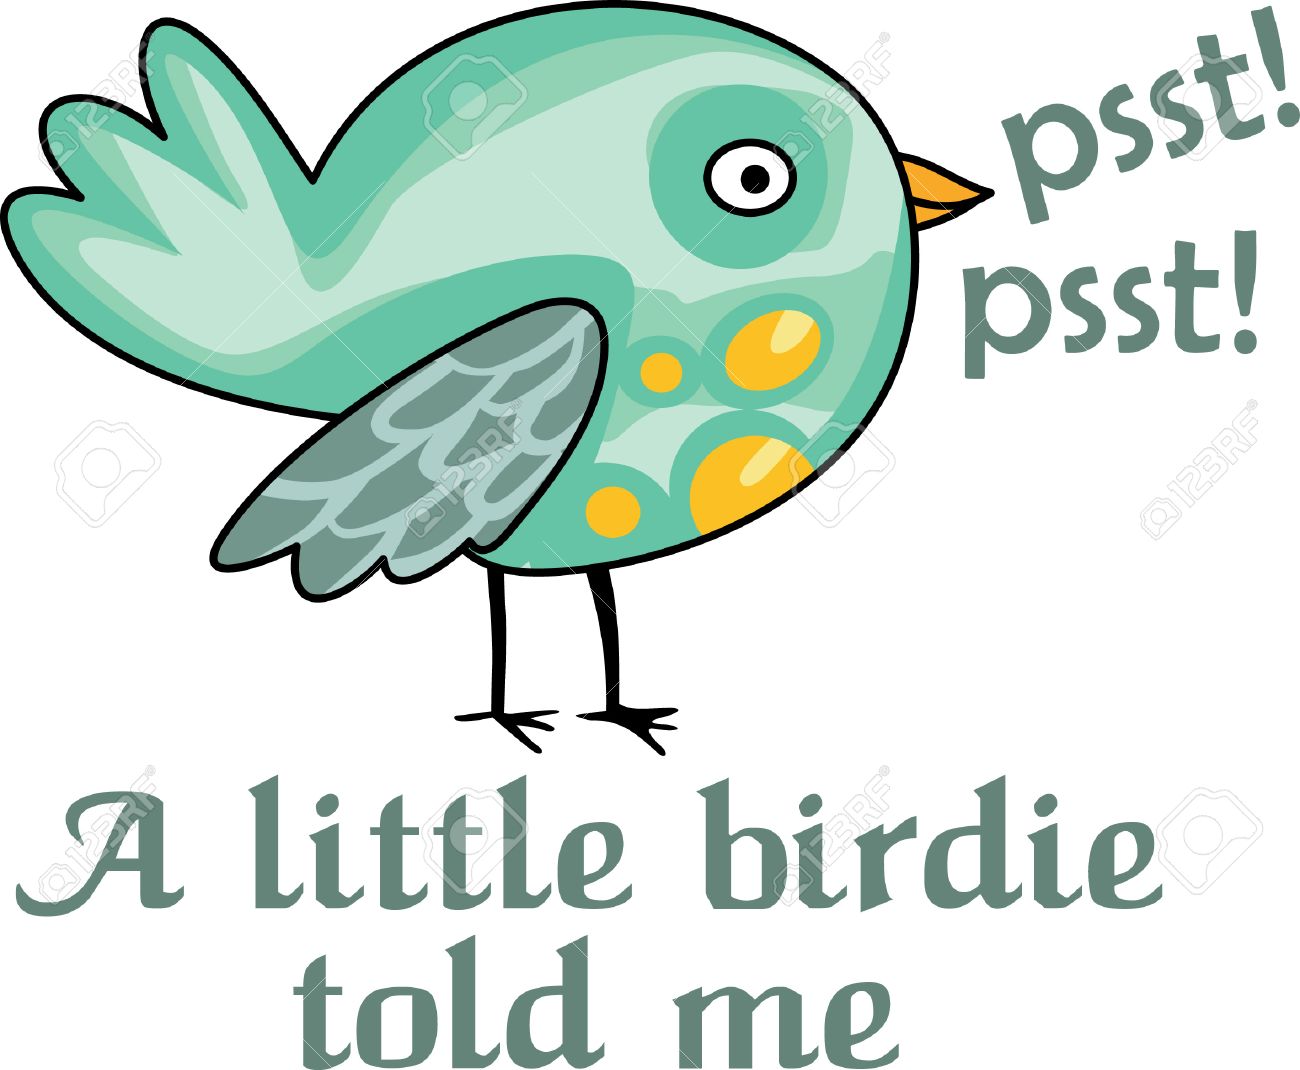 44988308-psst-psst-a-little-birdie-told-me-that-someone-special-wants-this-image-.jpg